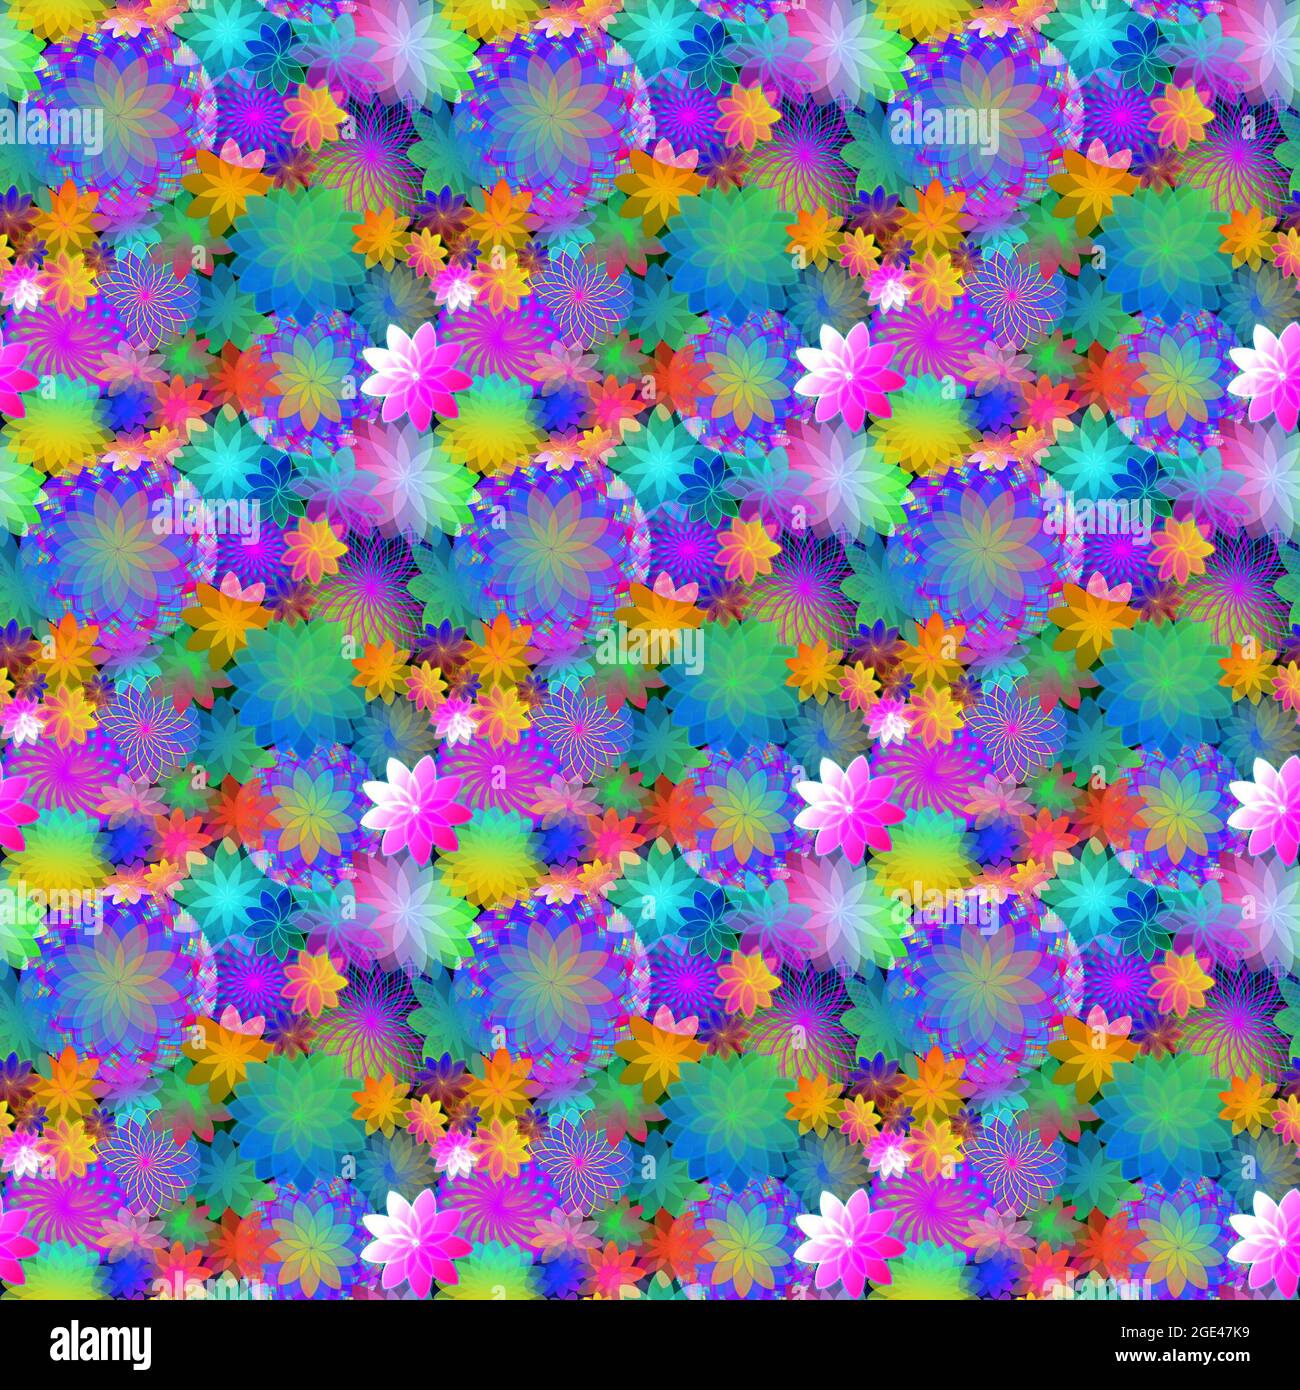 Brightly colored graphic flower pattern seamless design Stock Photo